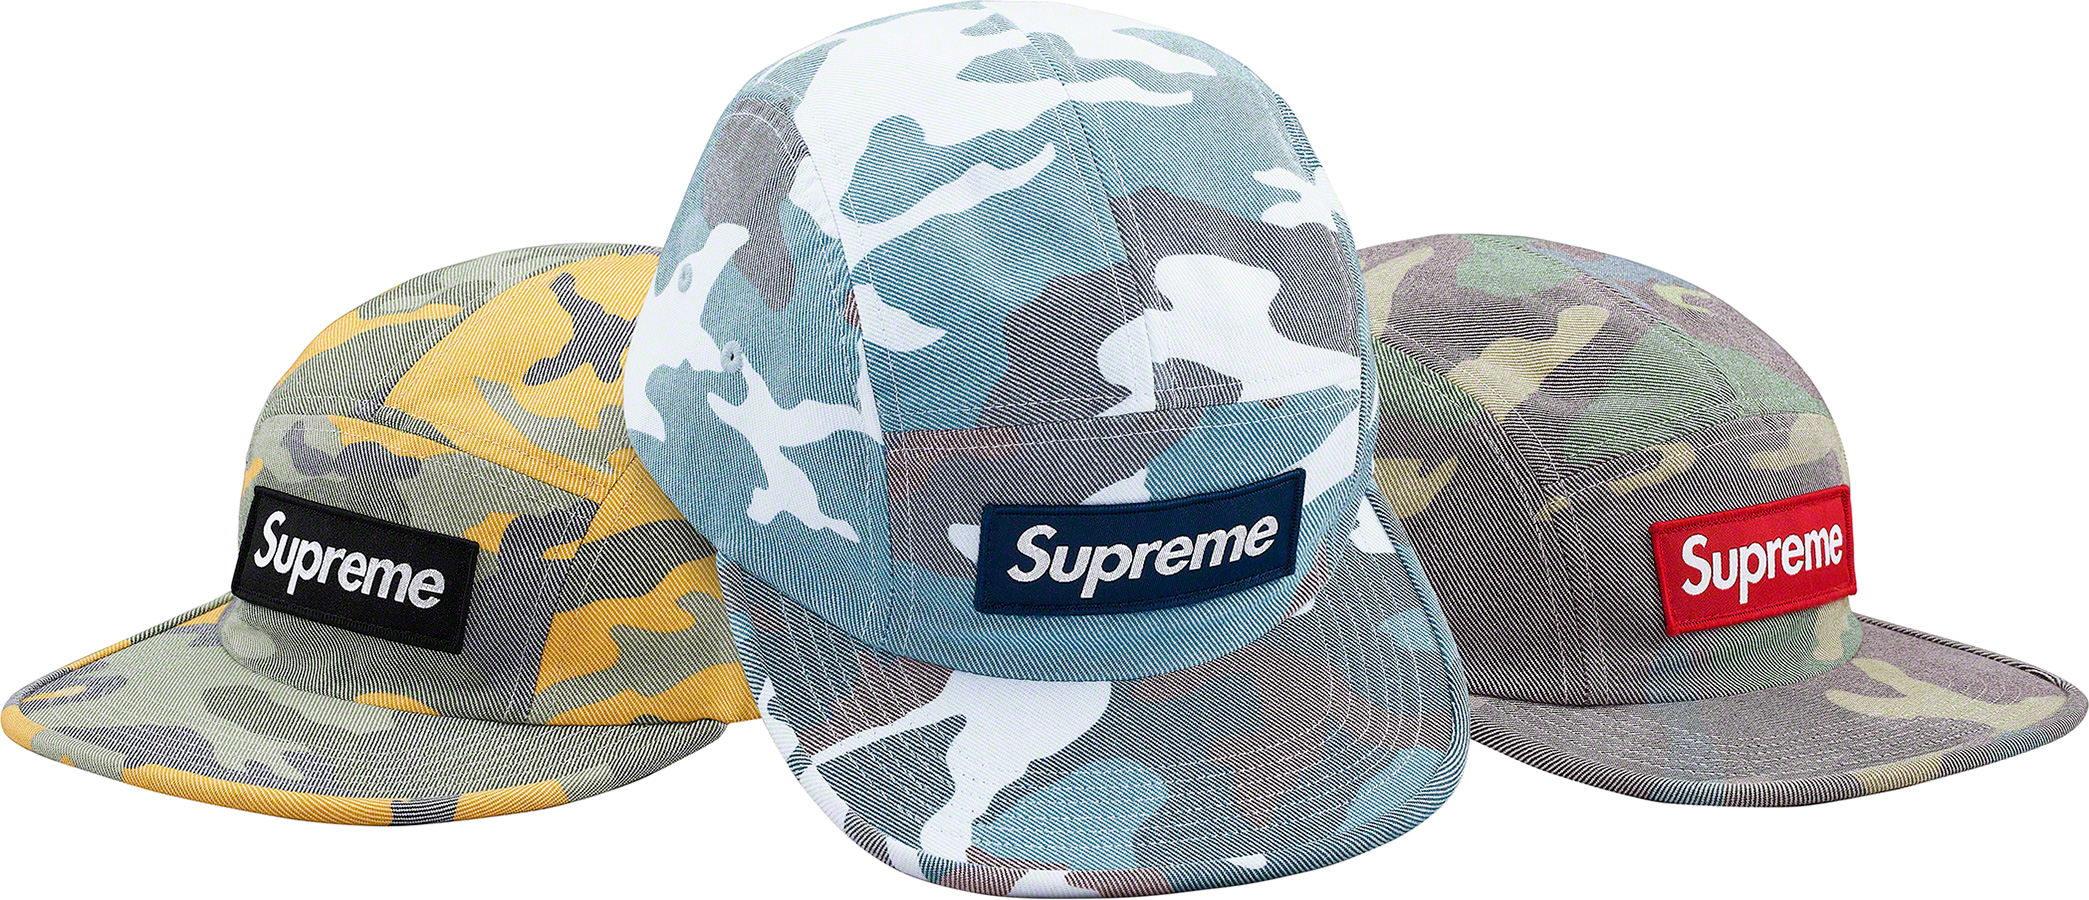 Supreme 19SS Washed Out Camo Camp Cap www.krzysztofbialy.com